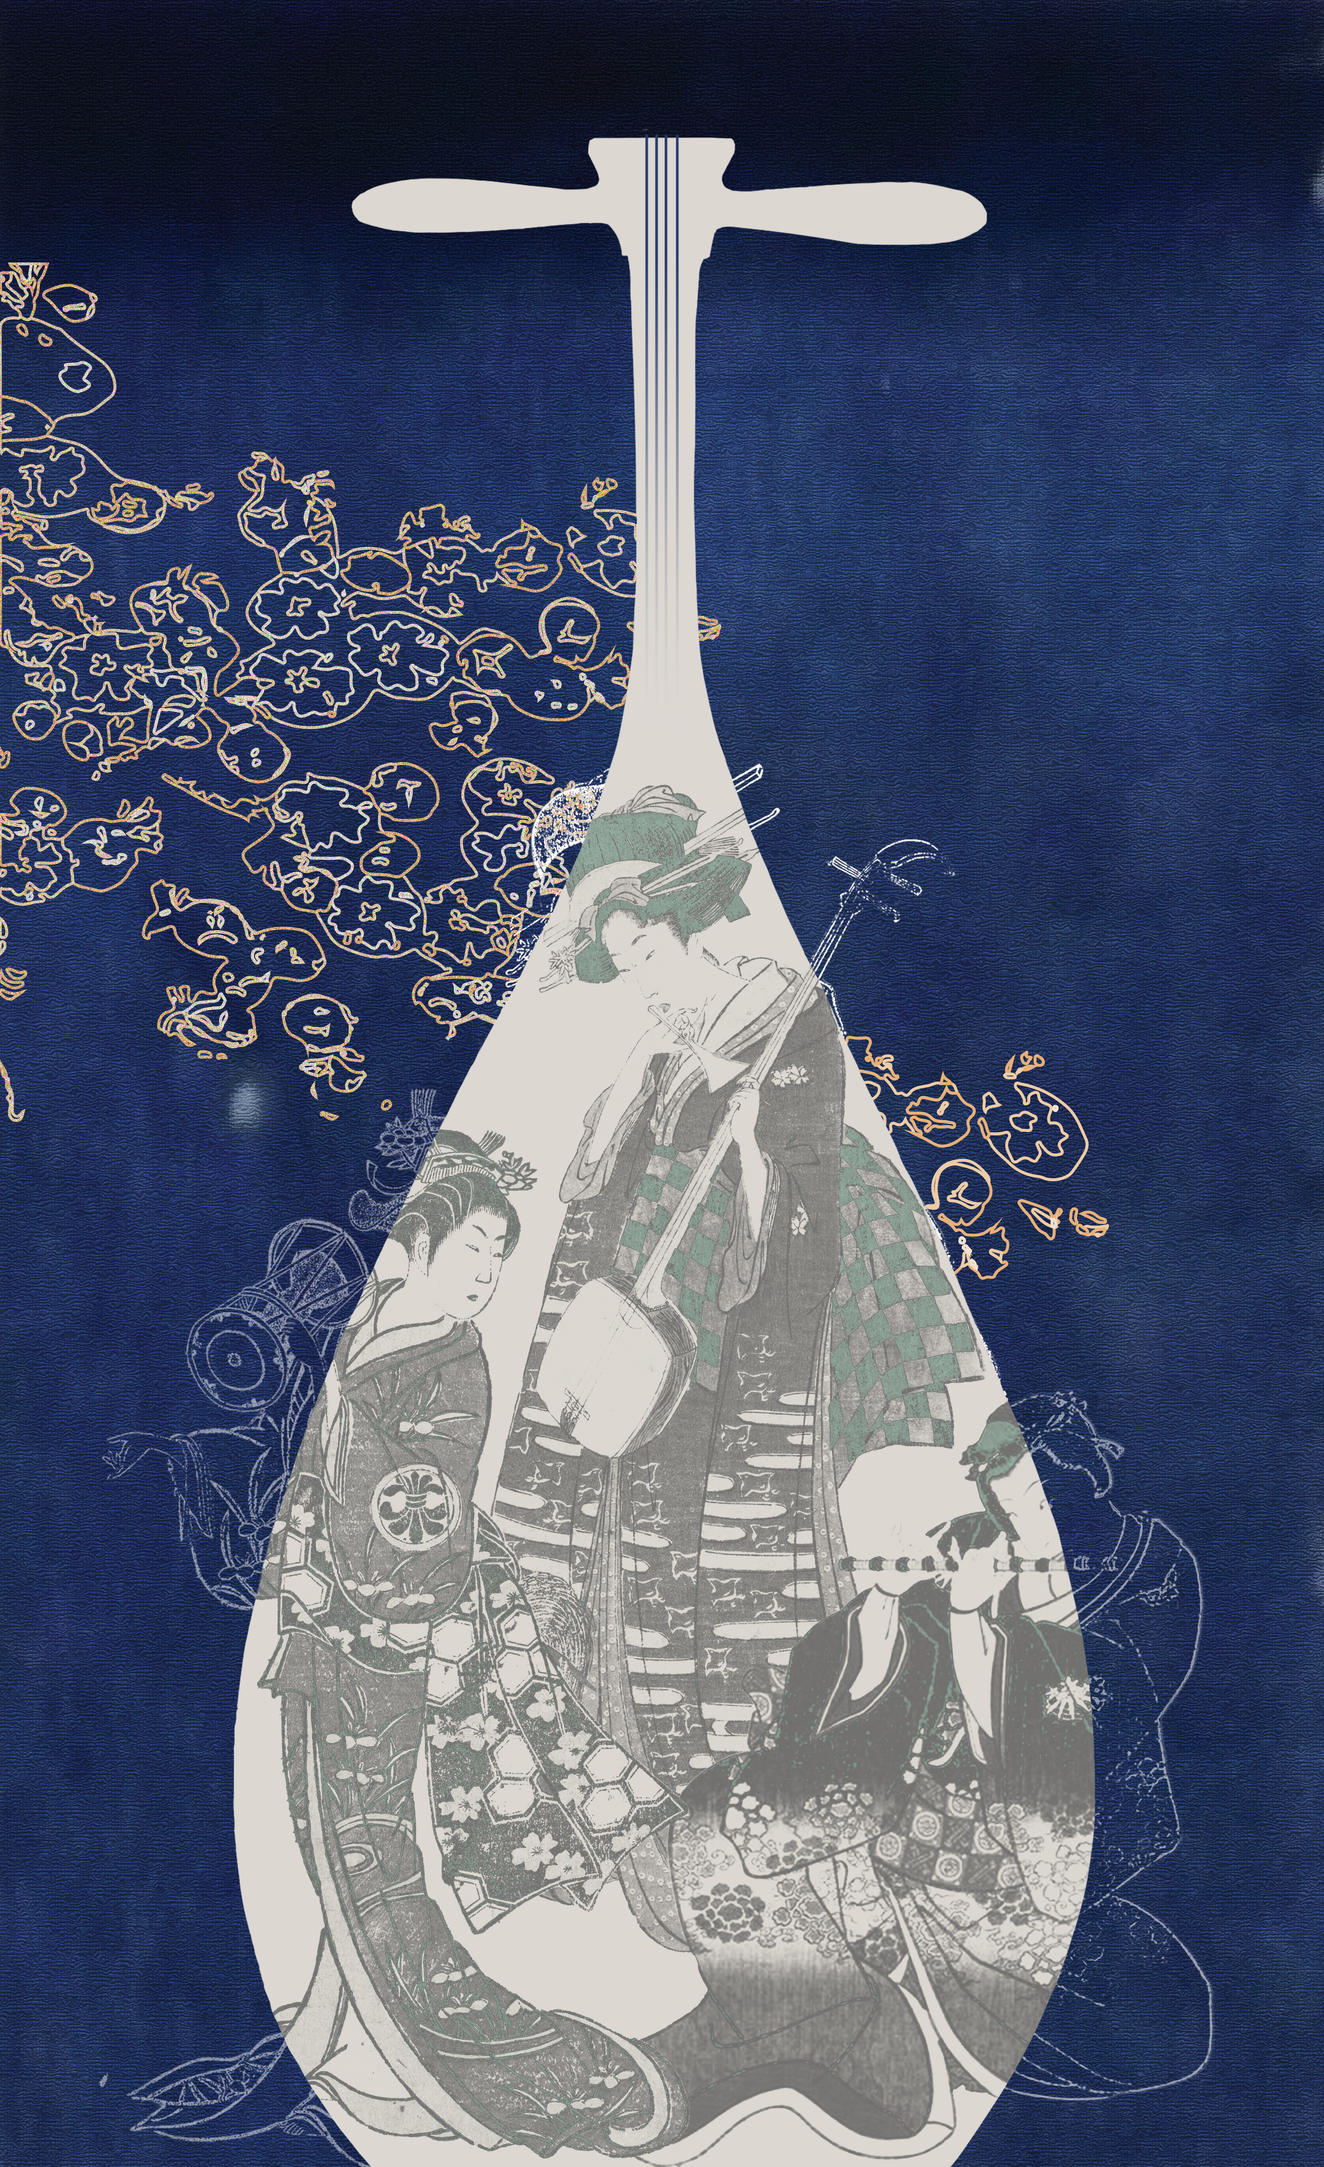 The silhouette of a white lute is overlaid with woodcut images of three musicians. The lute is centered on a dark blue background embellished with orange and white flowers and leaves. 